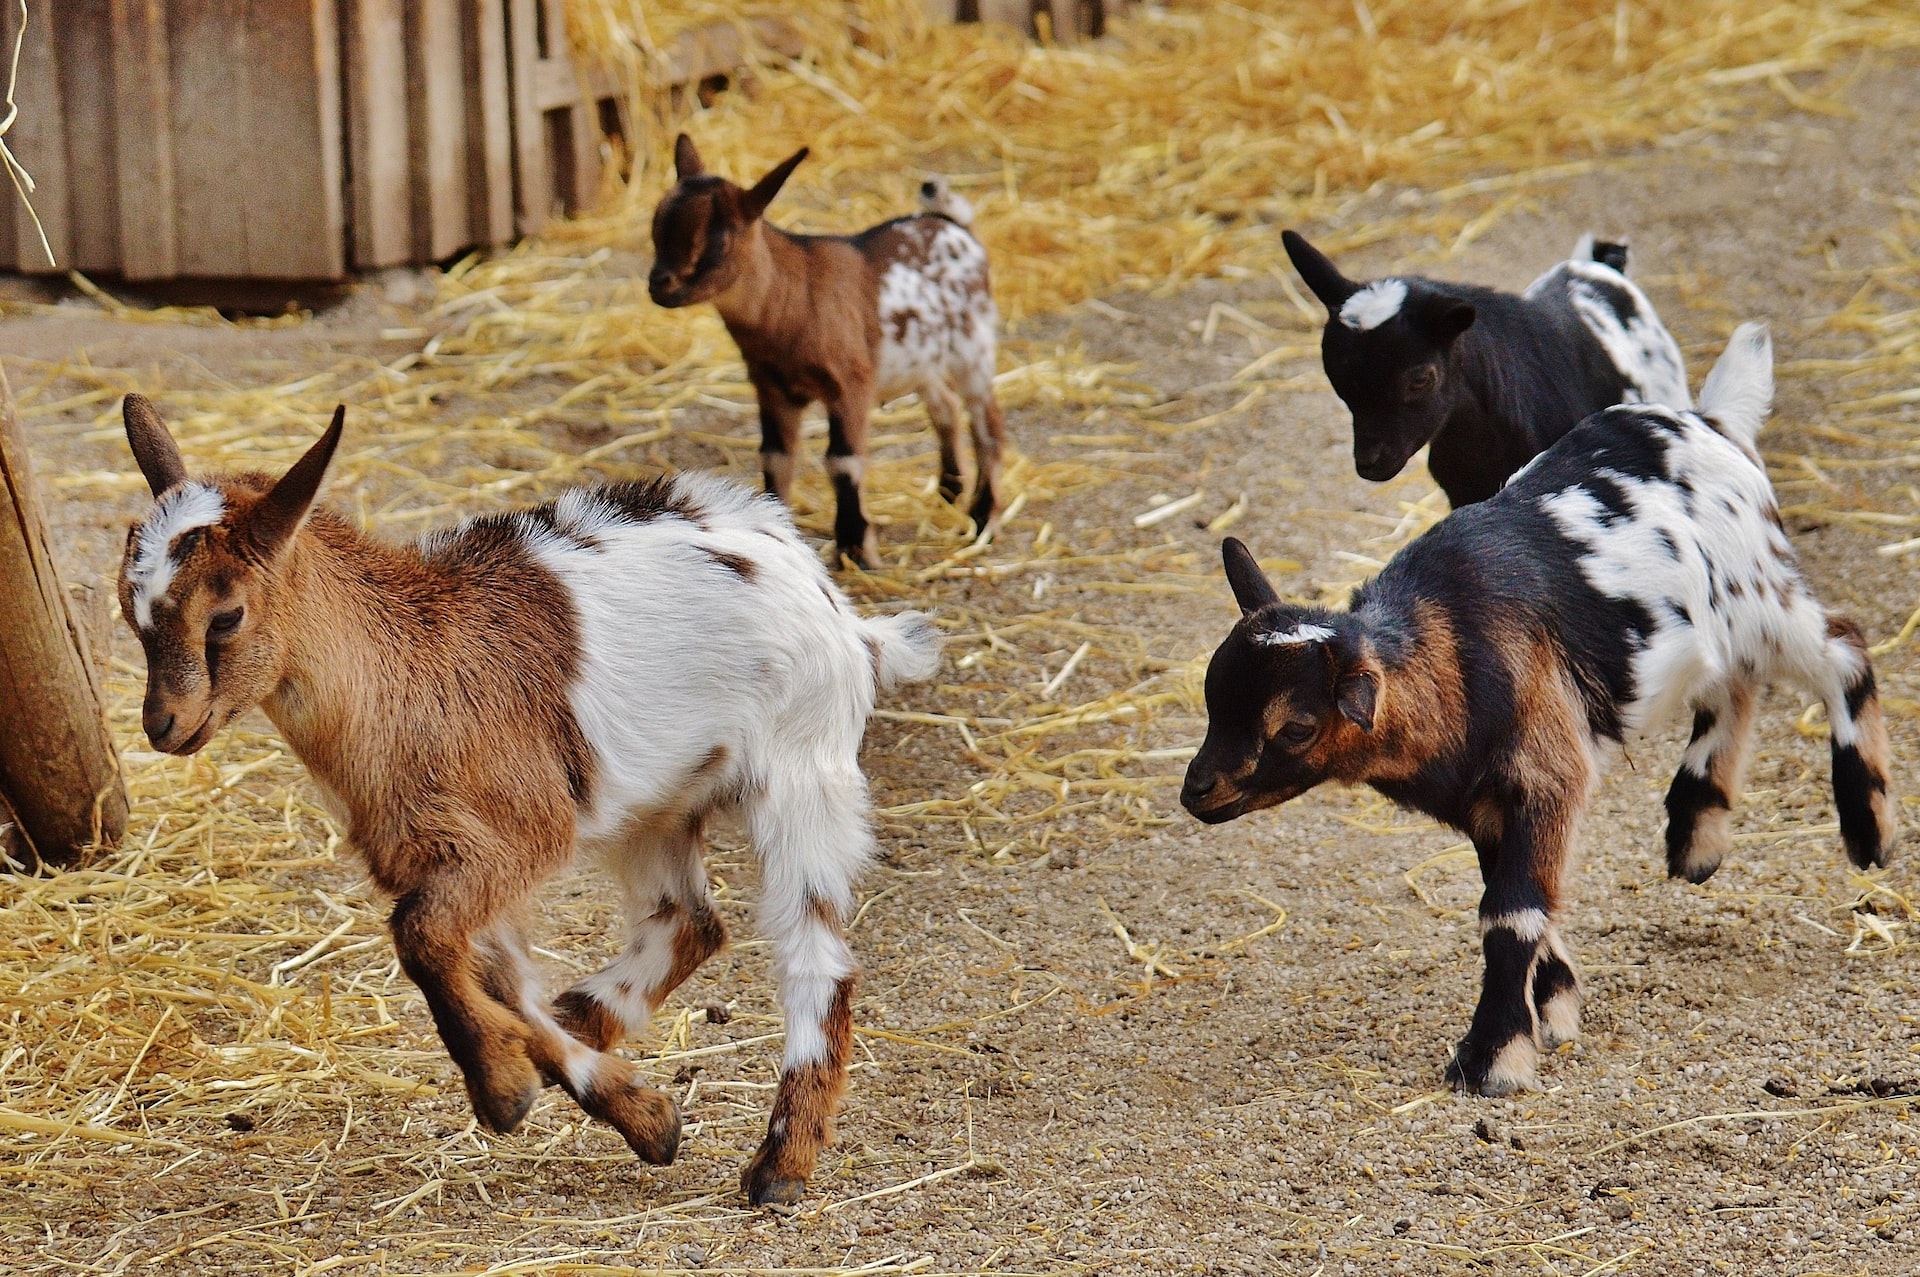 How to start a goat rental business?